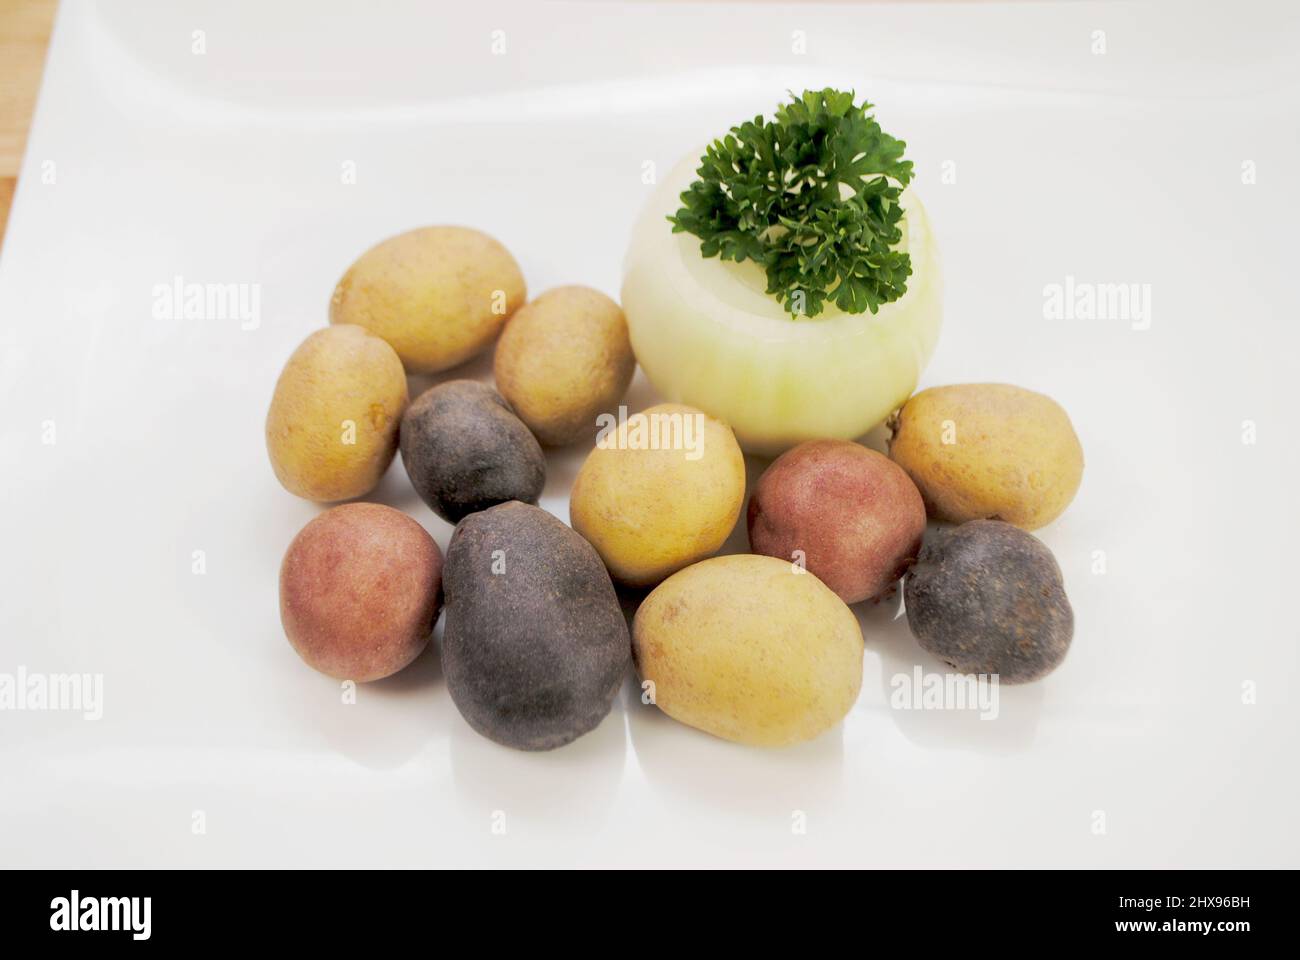 Close-Up of Baby Tri-Colored Potatoes Stock Photo